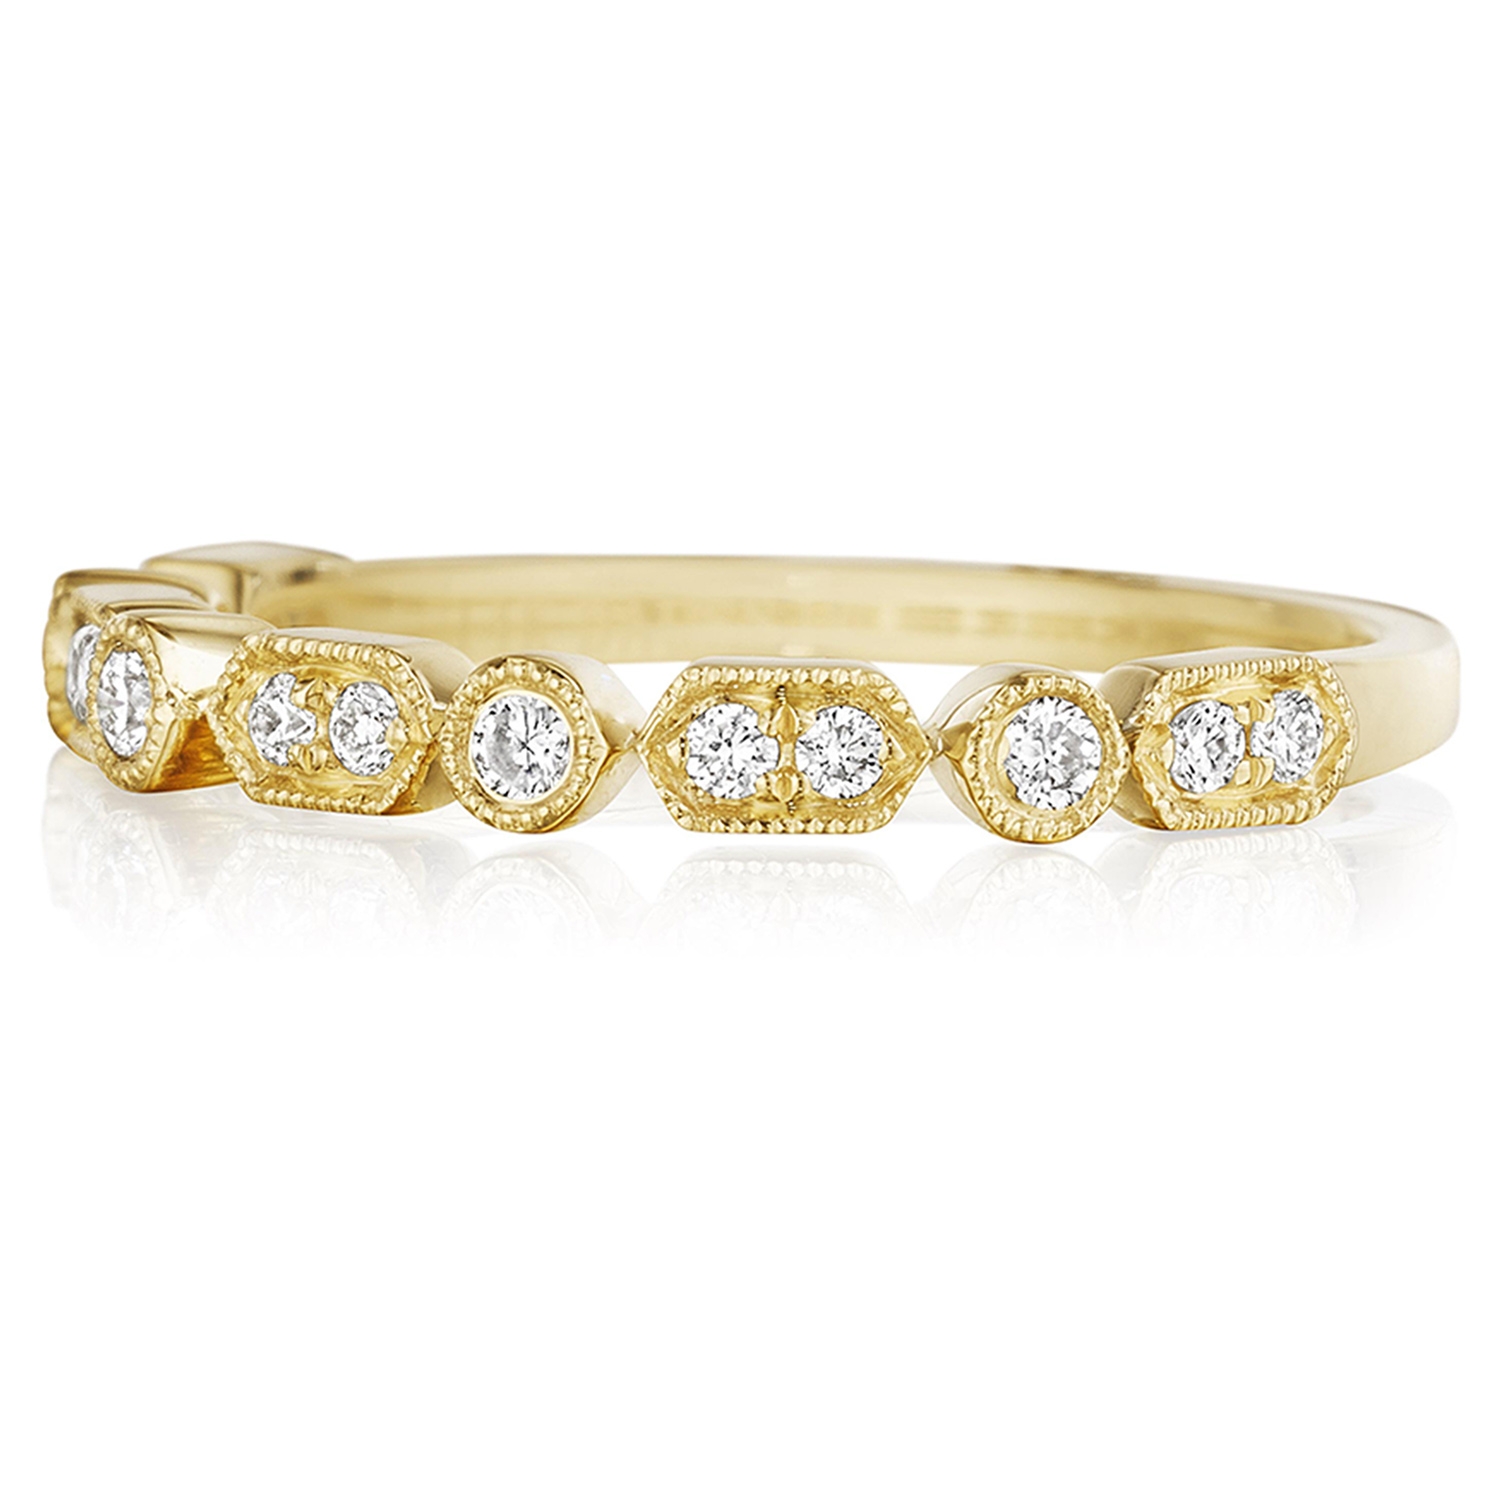 Henri Daussi R43-3 Yellow Gold Bead and Bezel Set Diamond Band with Miligrain Detail